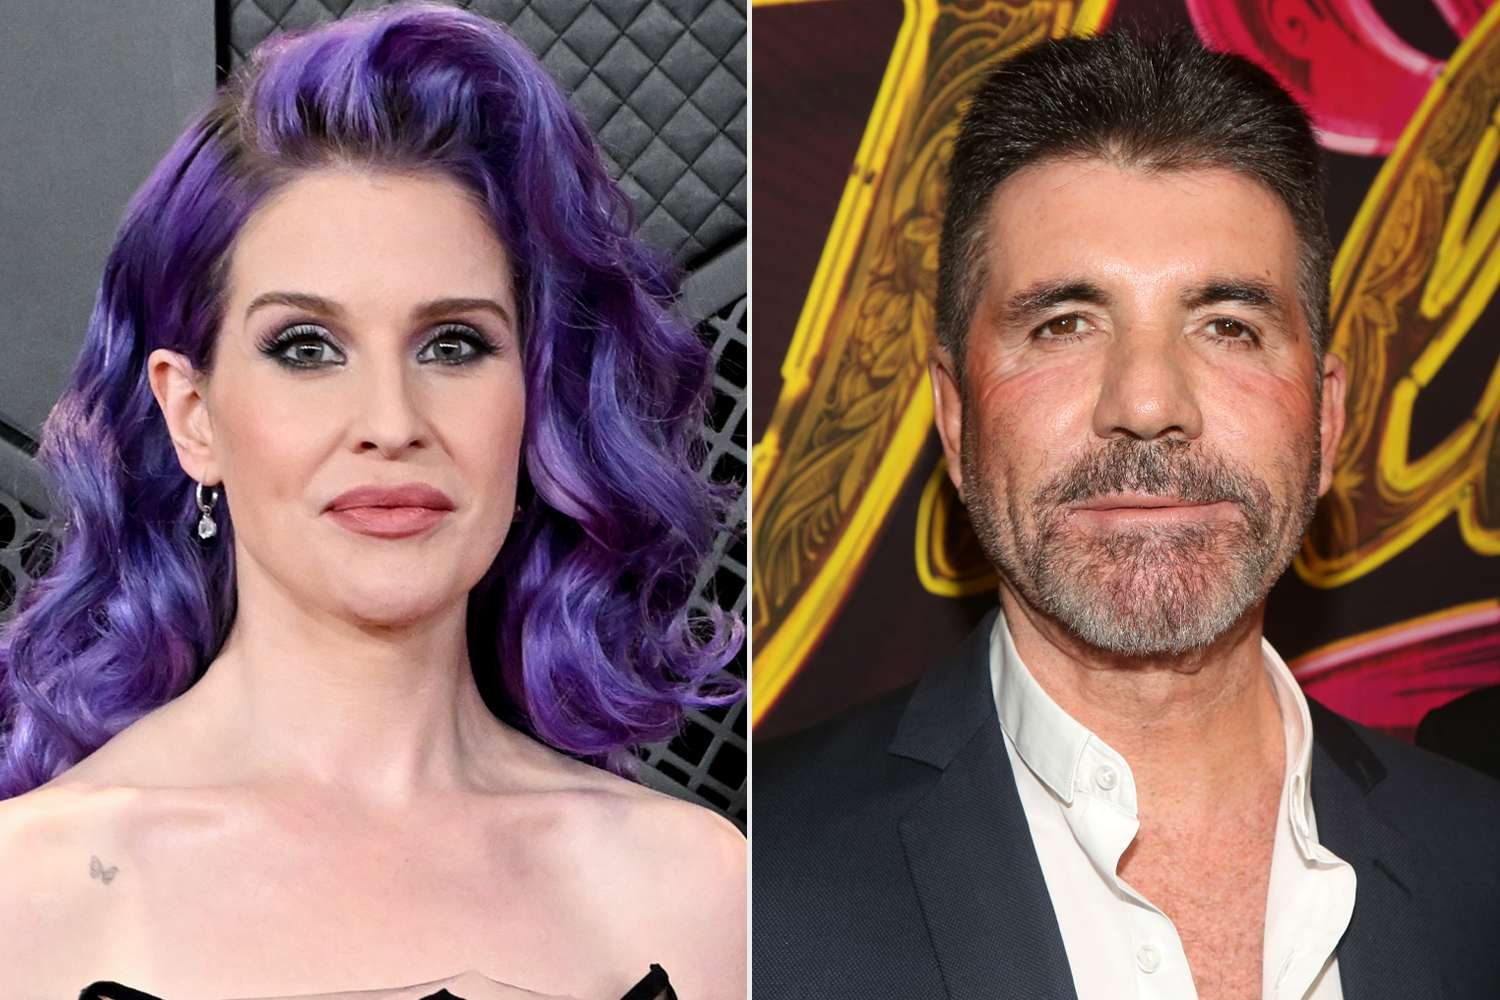 Kelly Osbourne Says Simon Cowell ’Threw a Fit’ and Had Her Family Pulled from 'American Idol' Minutes Before Appearance